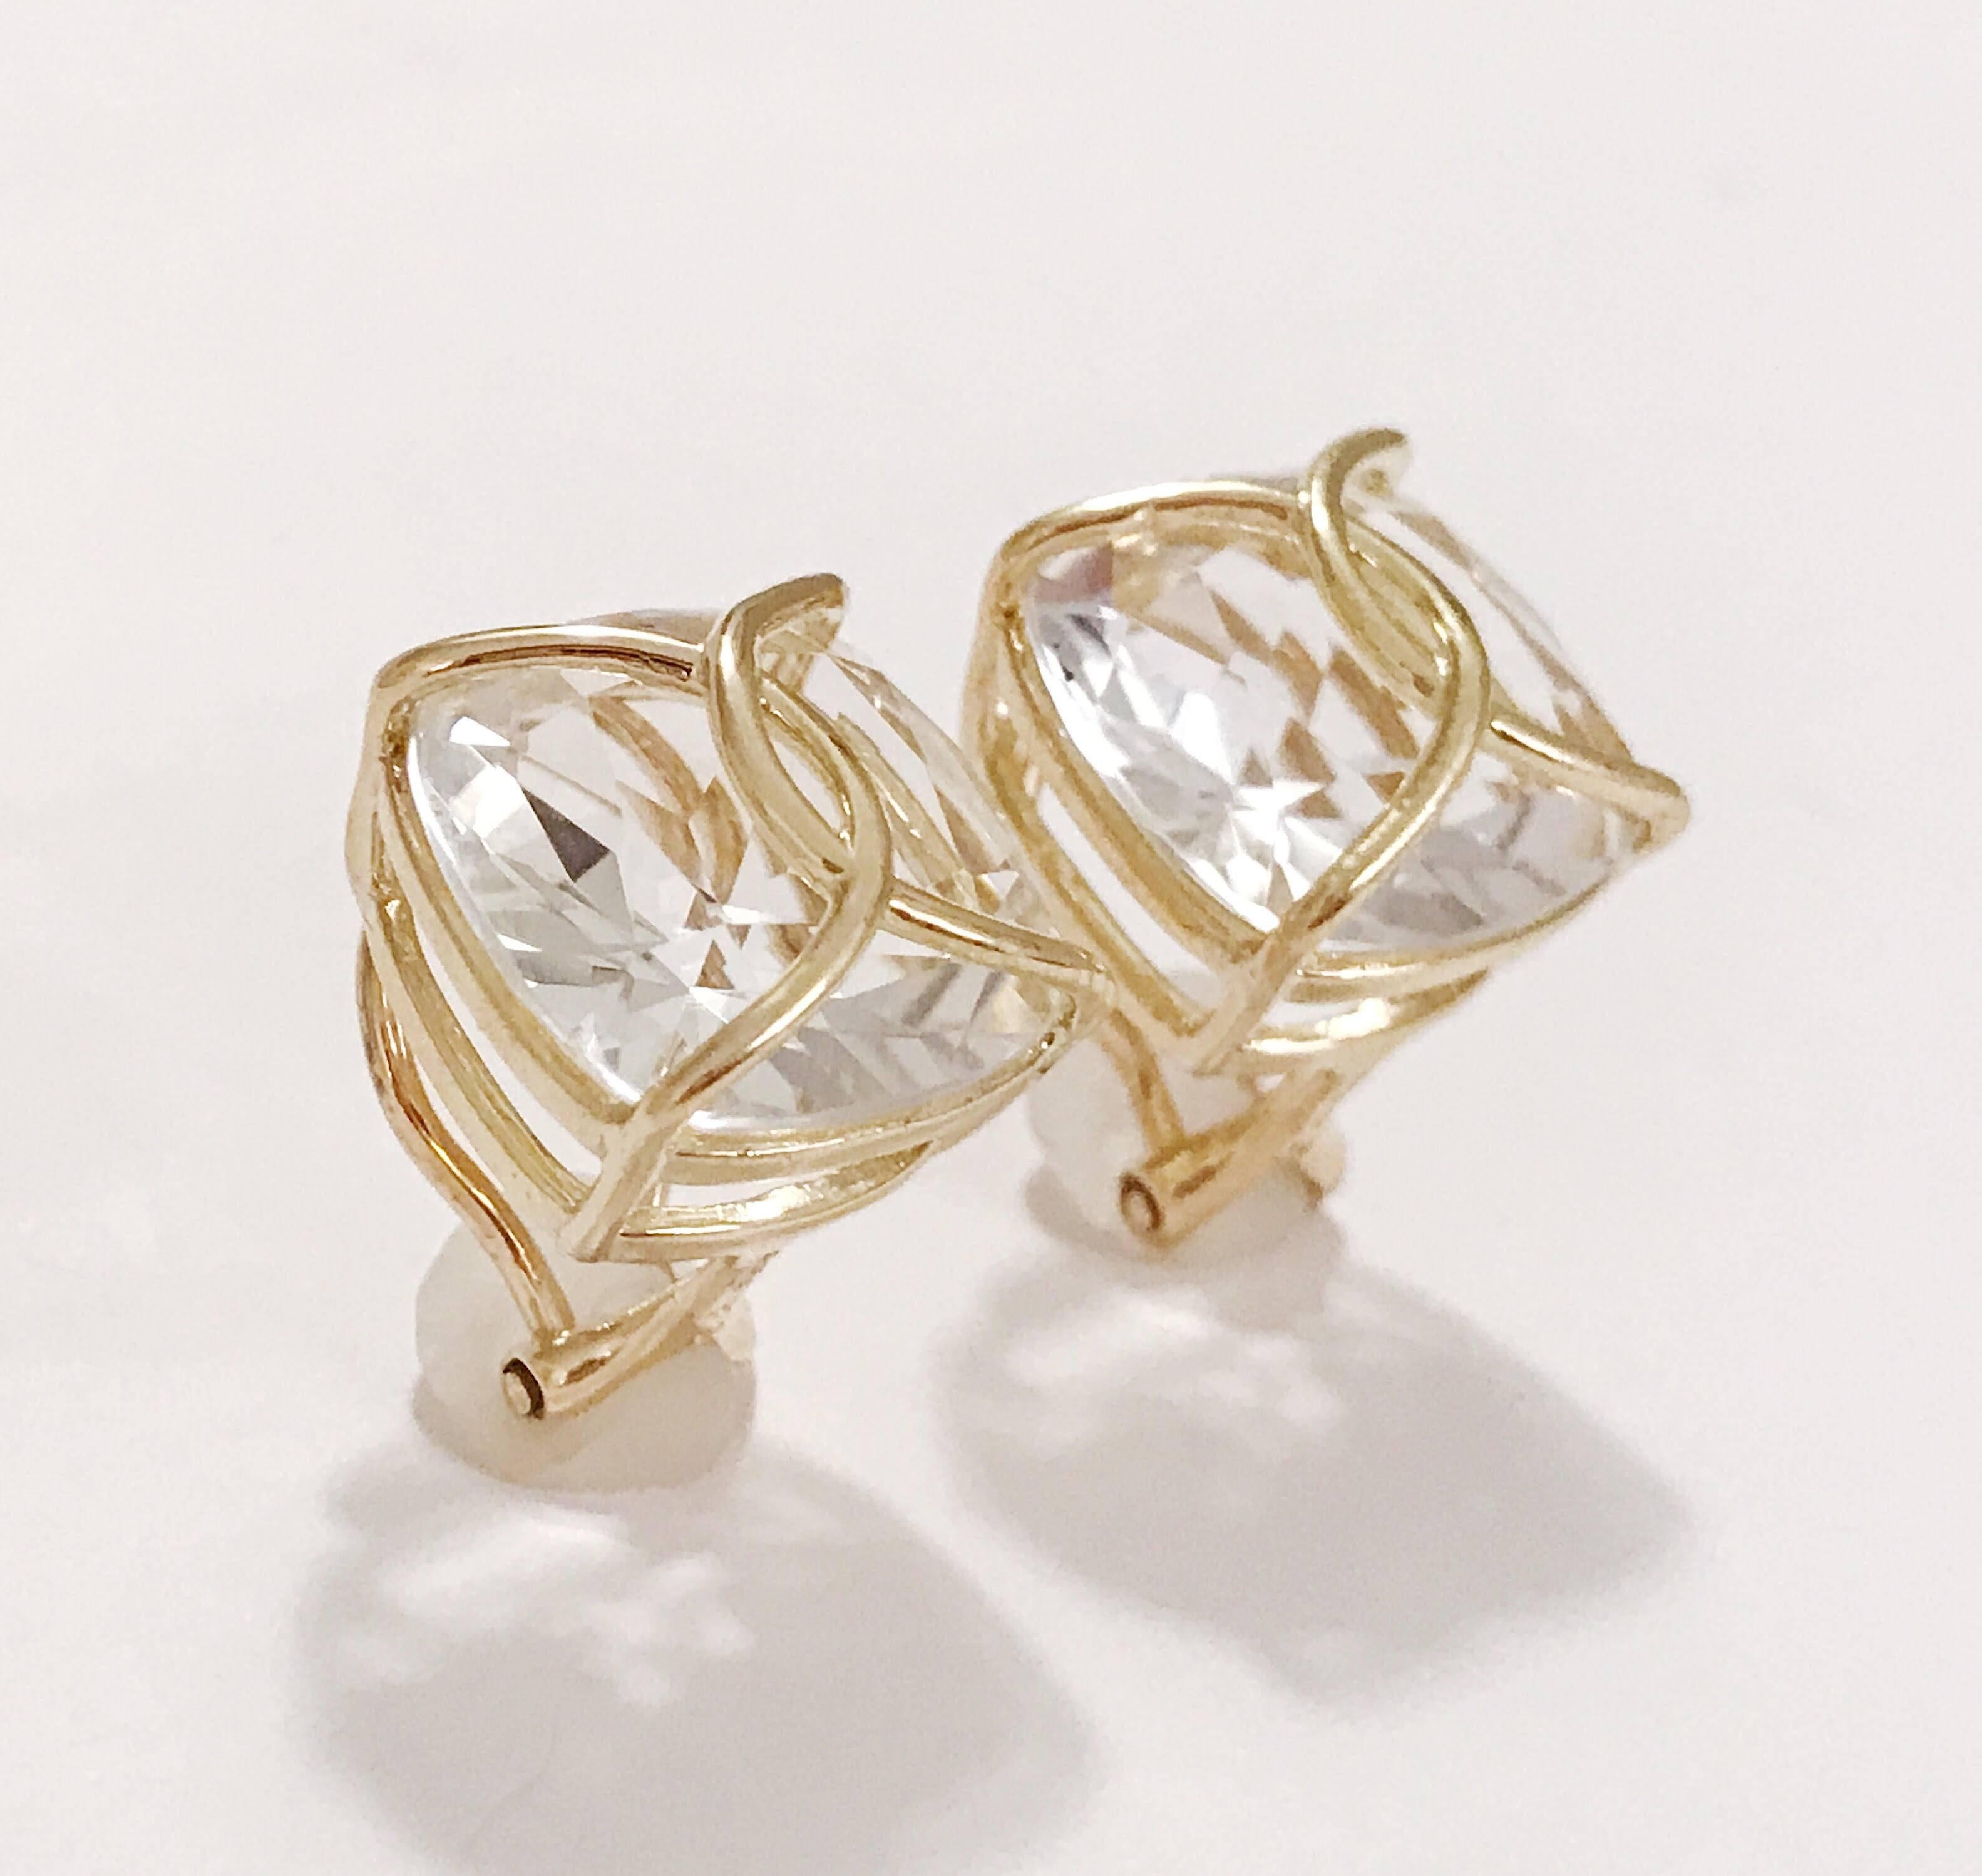 The Rock Crystal Cushion Stud  Earring with 18kt Yellow Gold Wire Wrap is approximately 15 mm. 

This earring can be made with any color 18kt gold and semi precious stone,

Please contact me with any questions you may have.

Best,
Christina  